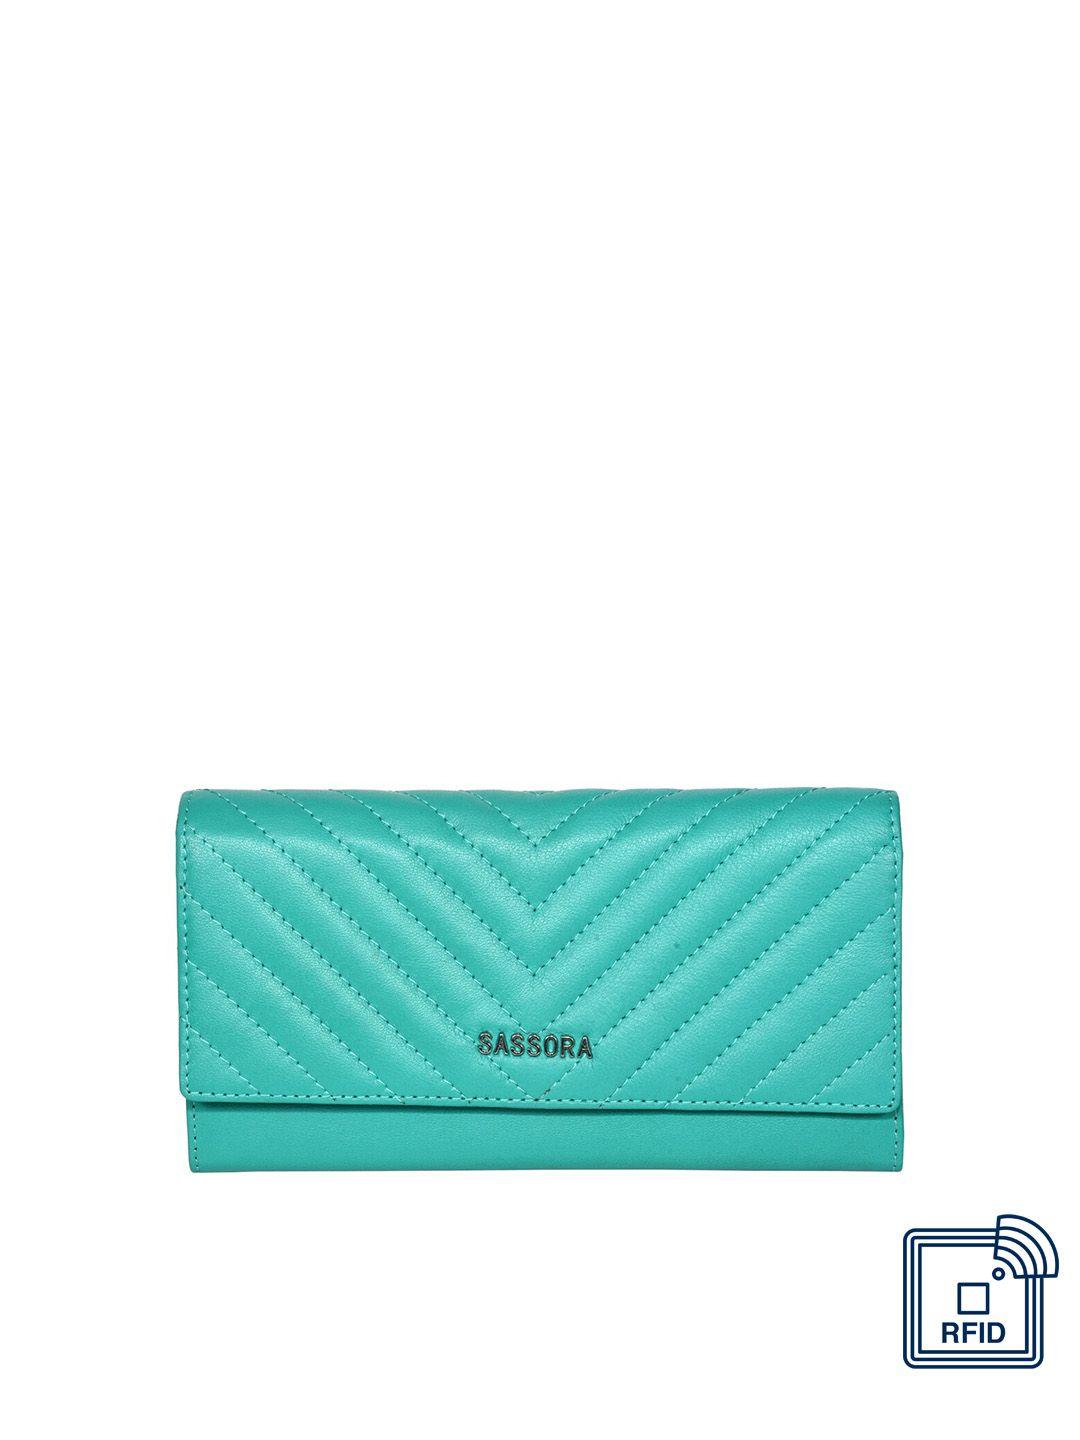 sassora women turquoise blue & silver-toned quilted leather envelope